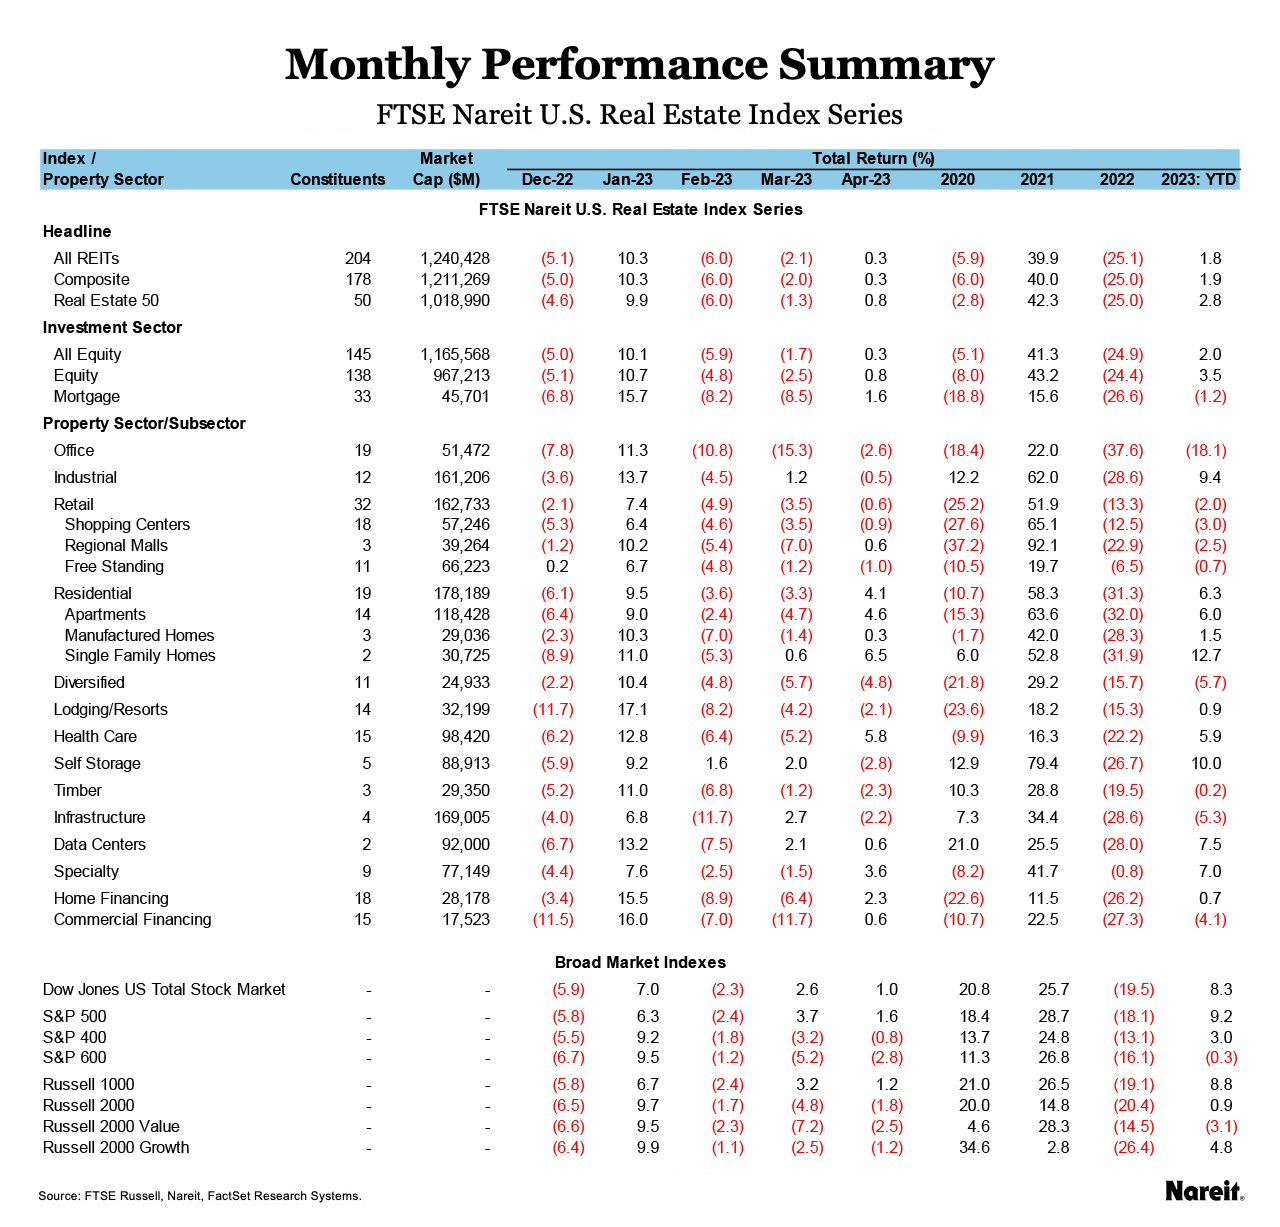 Monthly Performance Summary - FTSE Nareit U.S. Real Estate Index Series